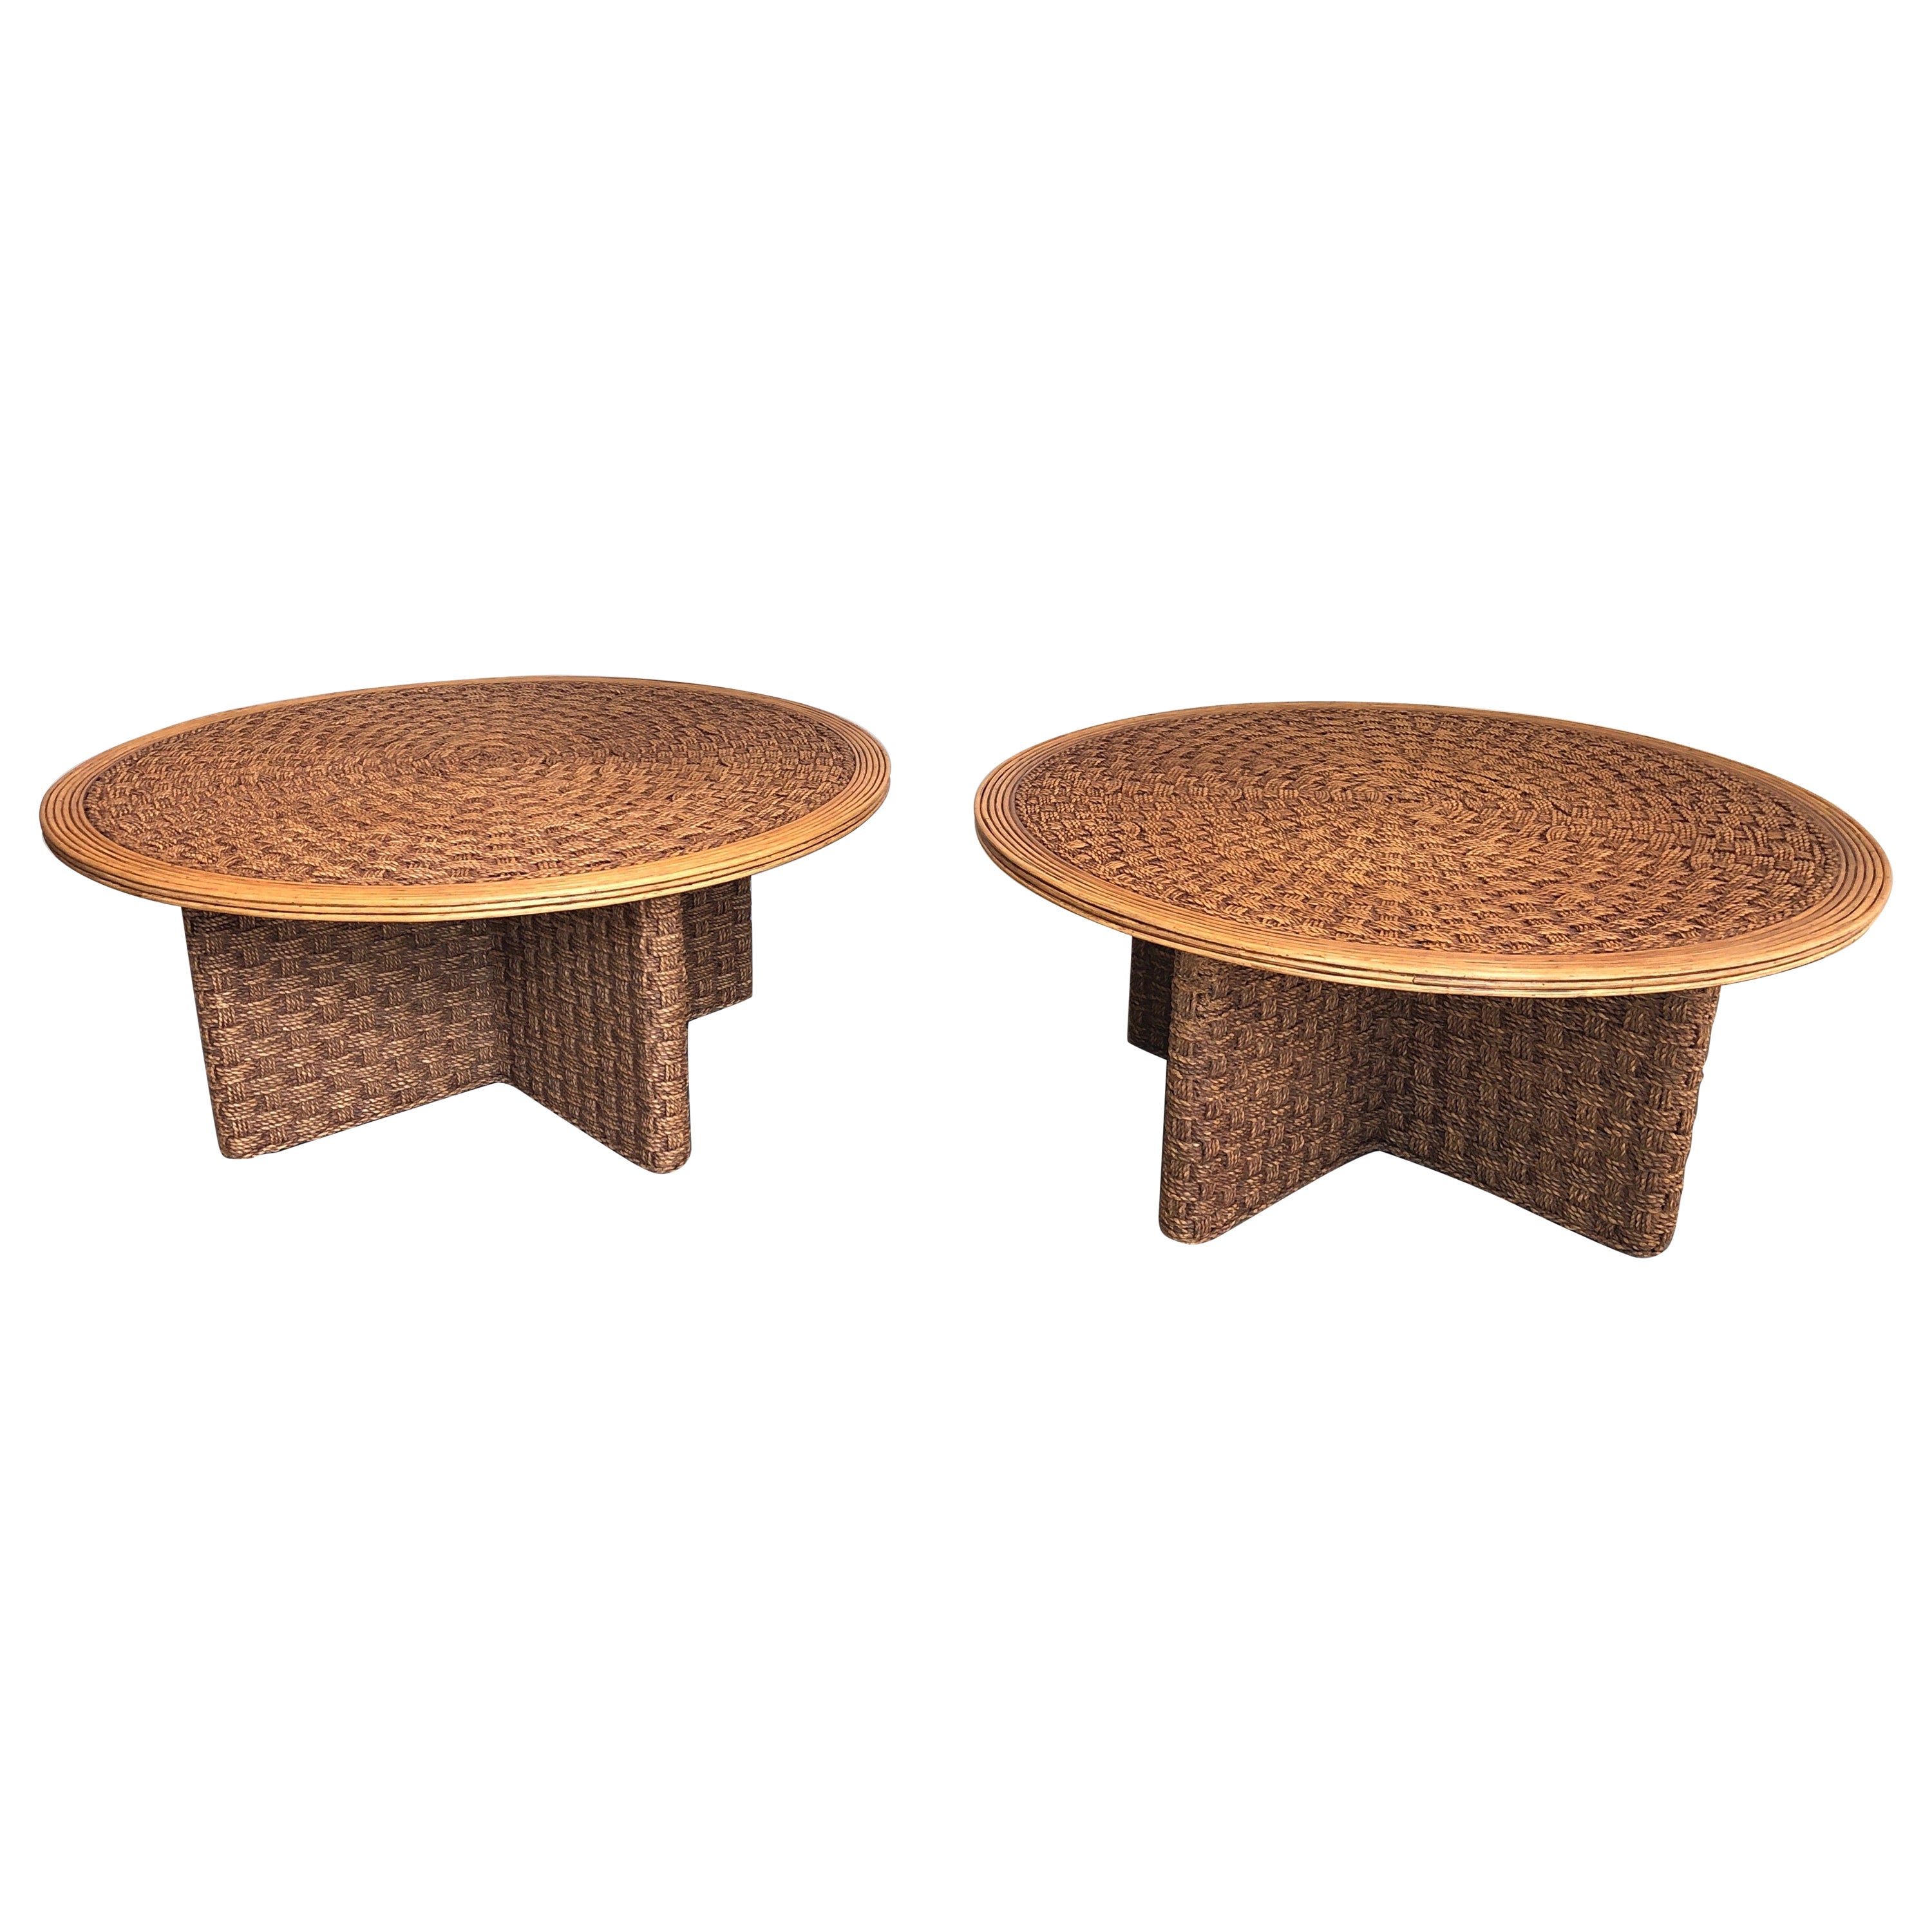 Rare Pair of Large Round Rope and Wood Coffee Table in the style of Audoux Minet For Sale